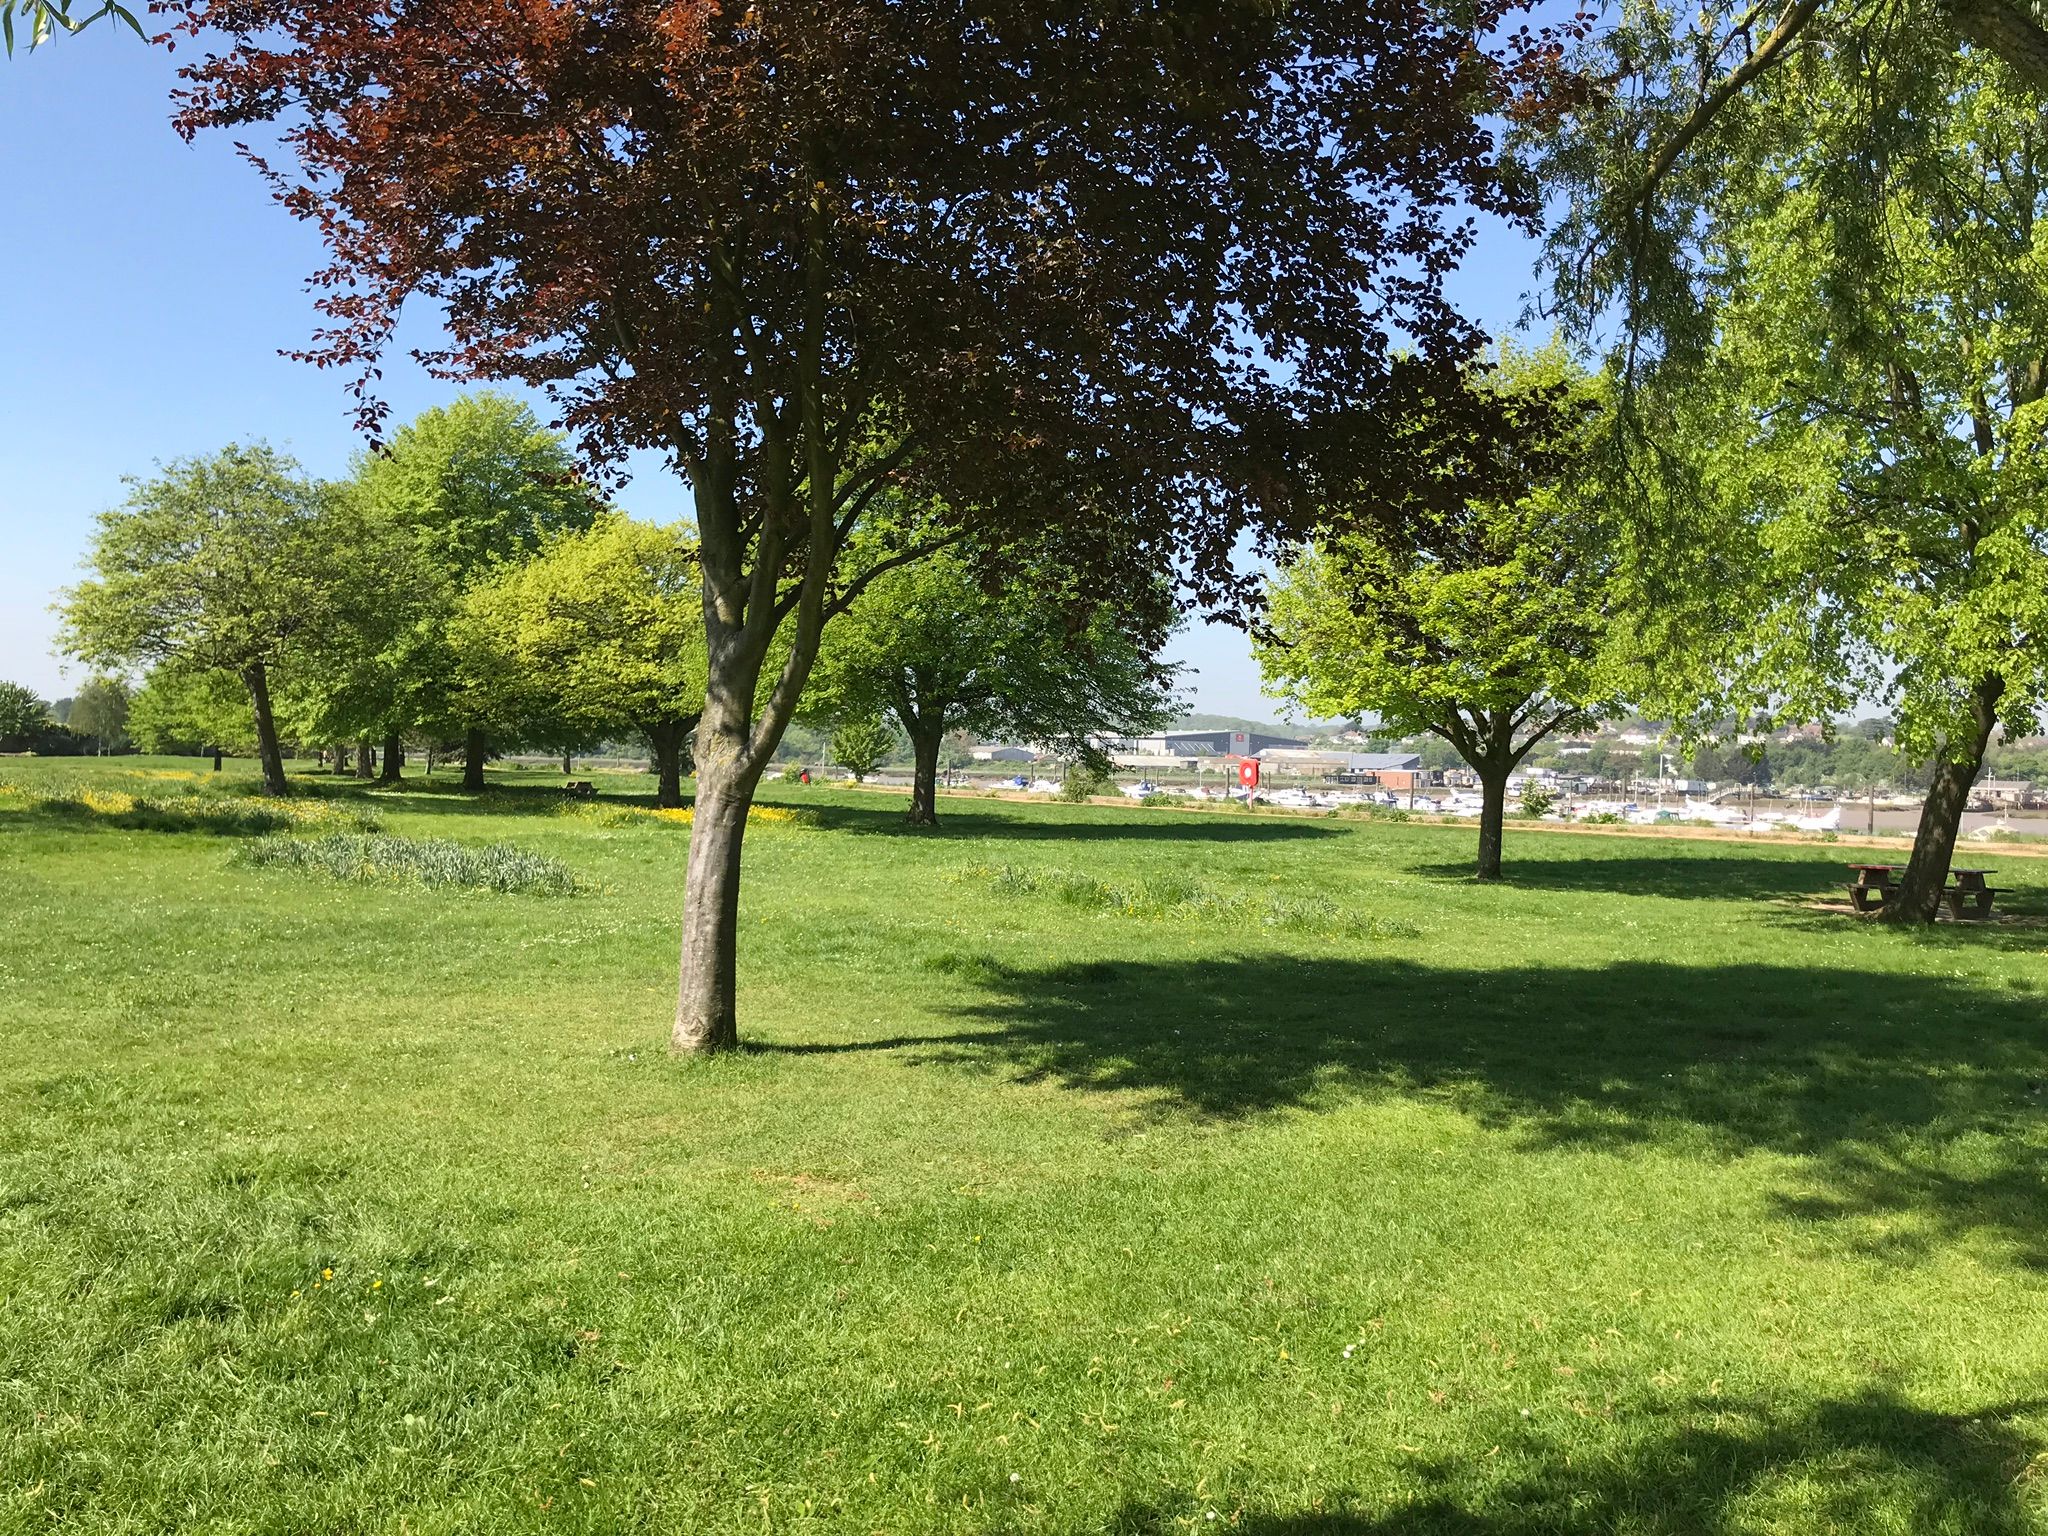 Grassy park with shady trees along the River Medway